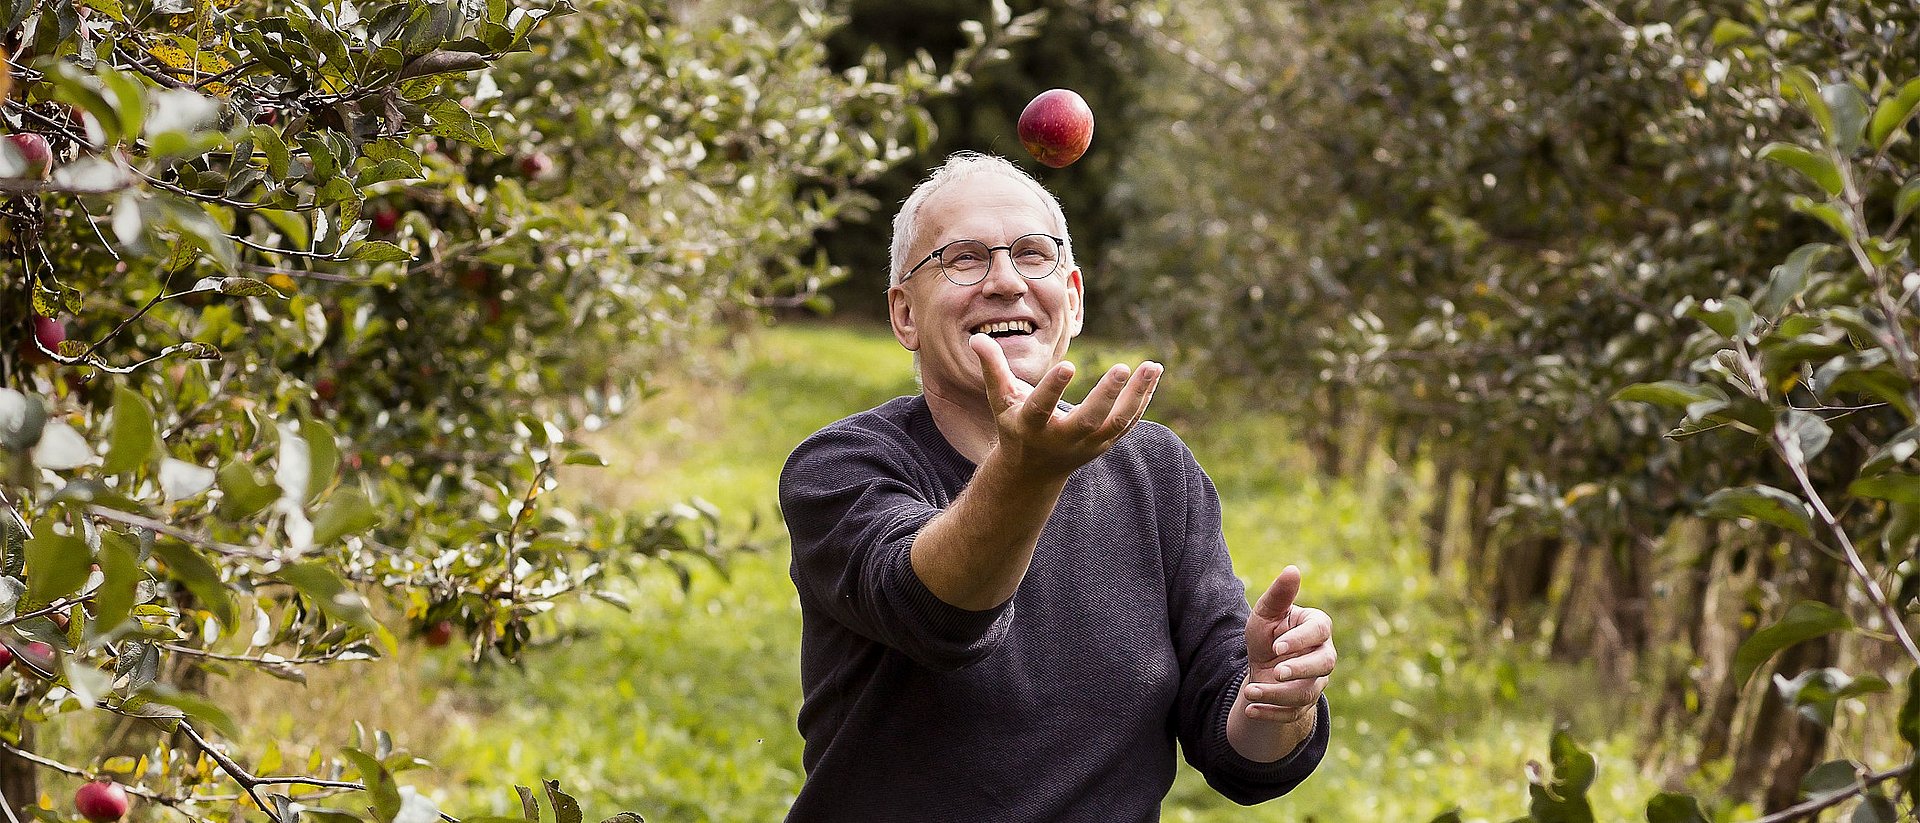 Wilfried Schwab, Professor of Biotechnology of Natural Products, and his team were responsible for the analytical work on apples for allergens as part of the interdisciplinary project. 